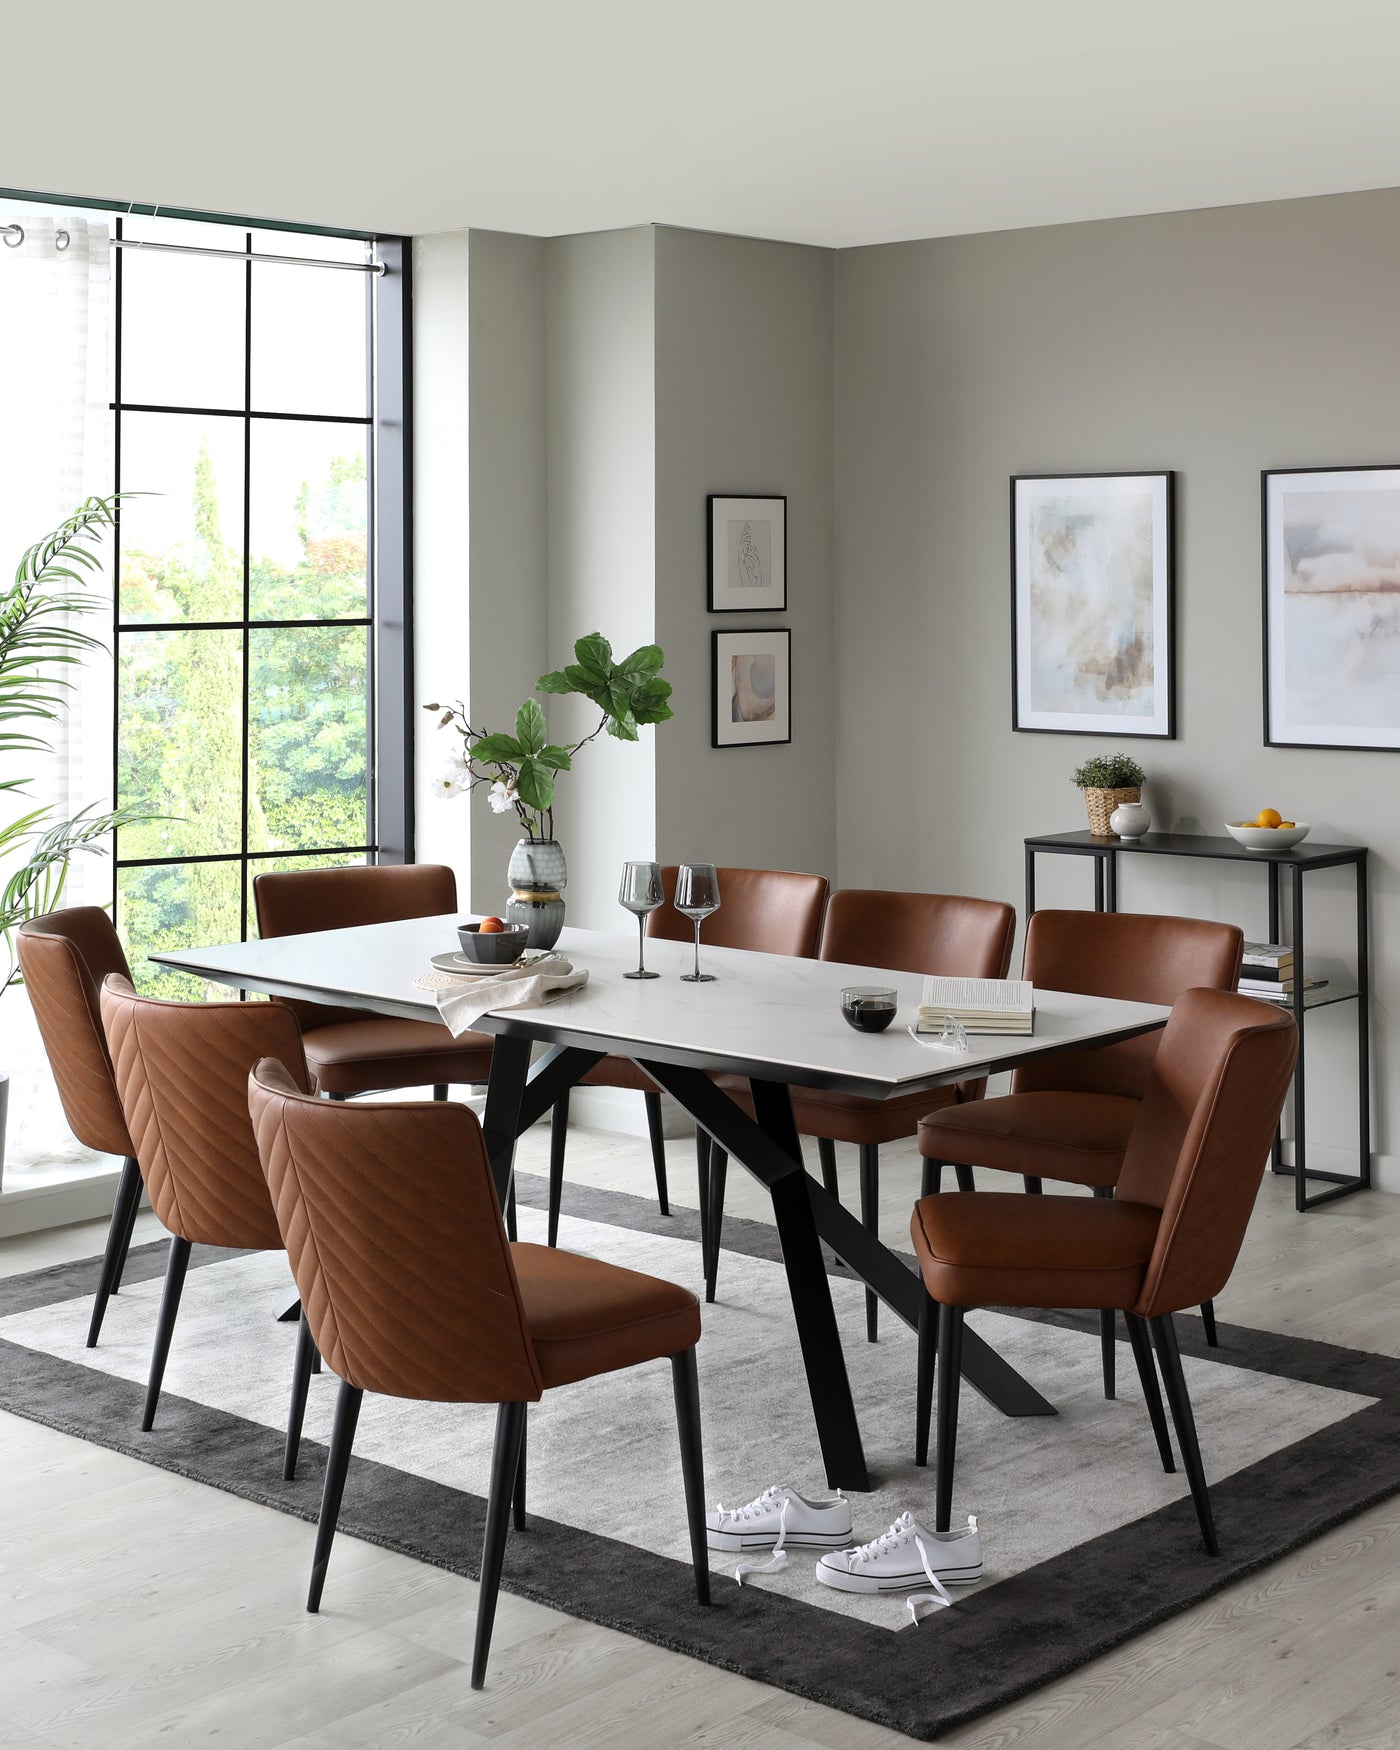 Modern dining room featuring a rectangular white marble-top table with black angular legs, surrounded by six caramel-brown upholstered dining chairs with quilted backrests and black metal legs. A minimalist black side table with books, a bowl, and decorative items is placed against the wall. The setup is on a grey area rug over light hardwood flooring.